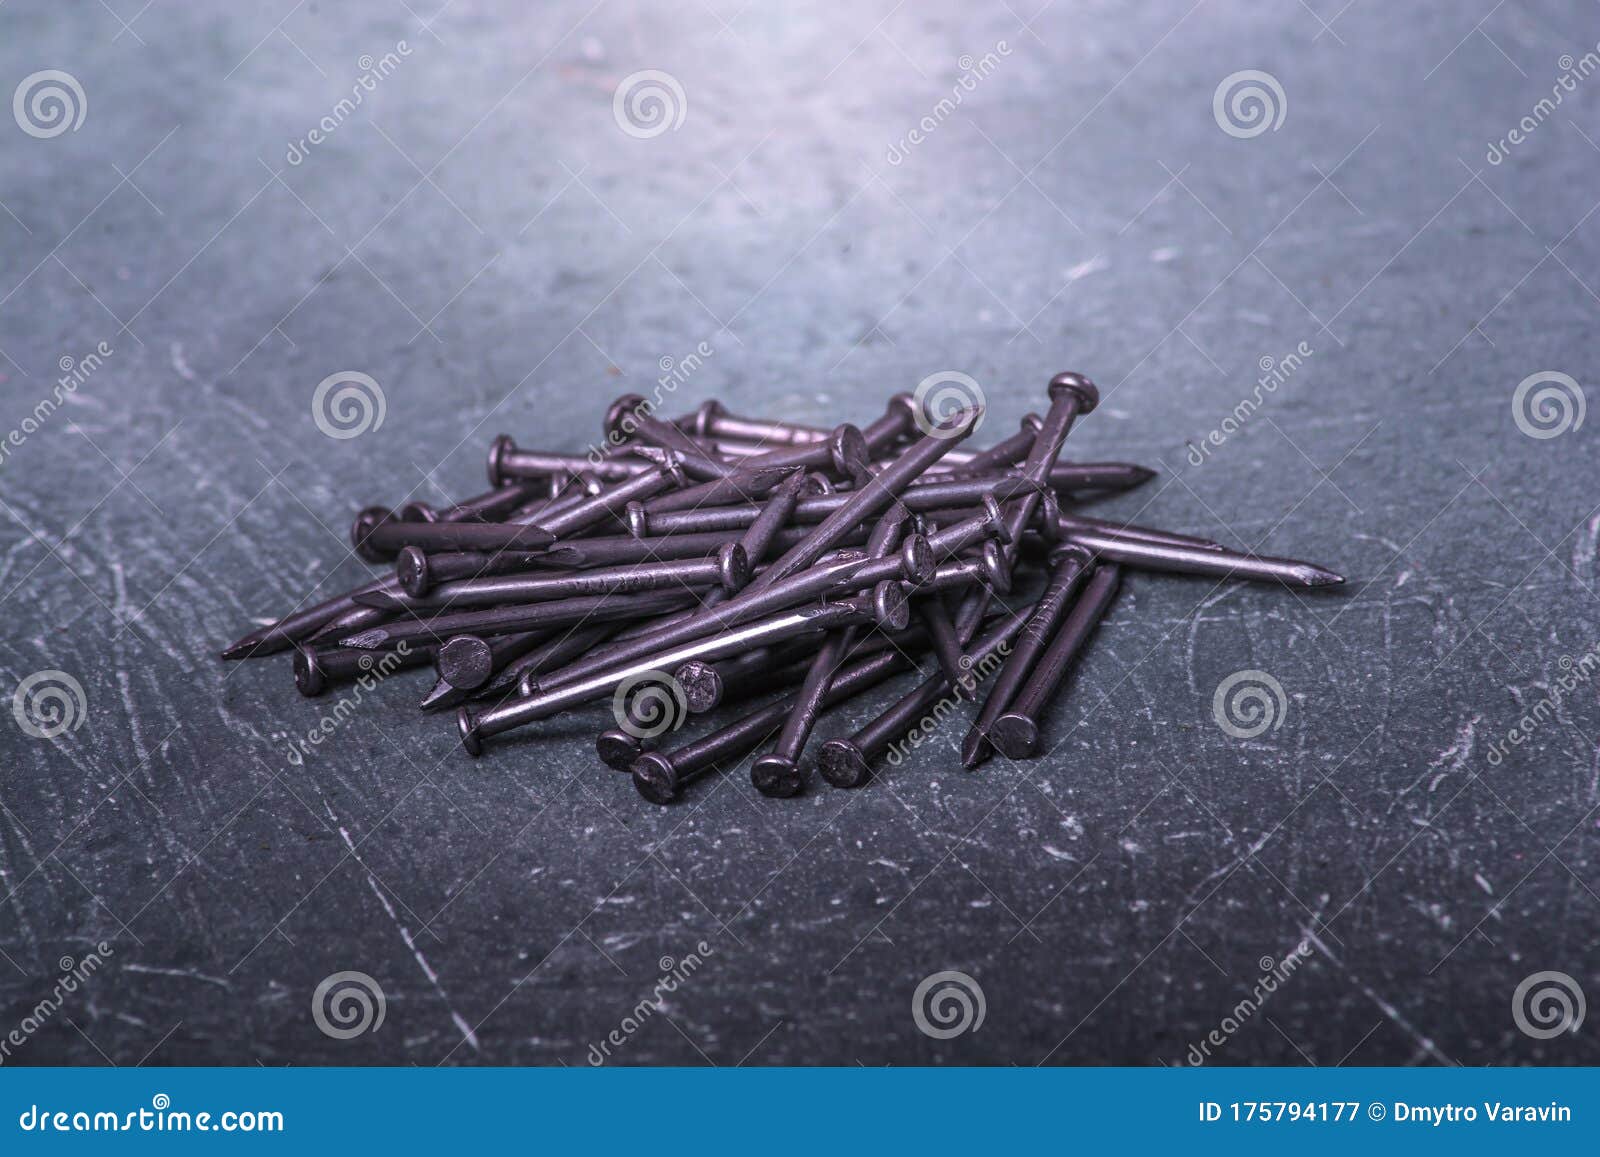 Construction Nails on a Workshop Table Stock Image - Image of metallic ...